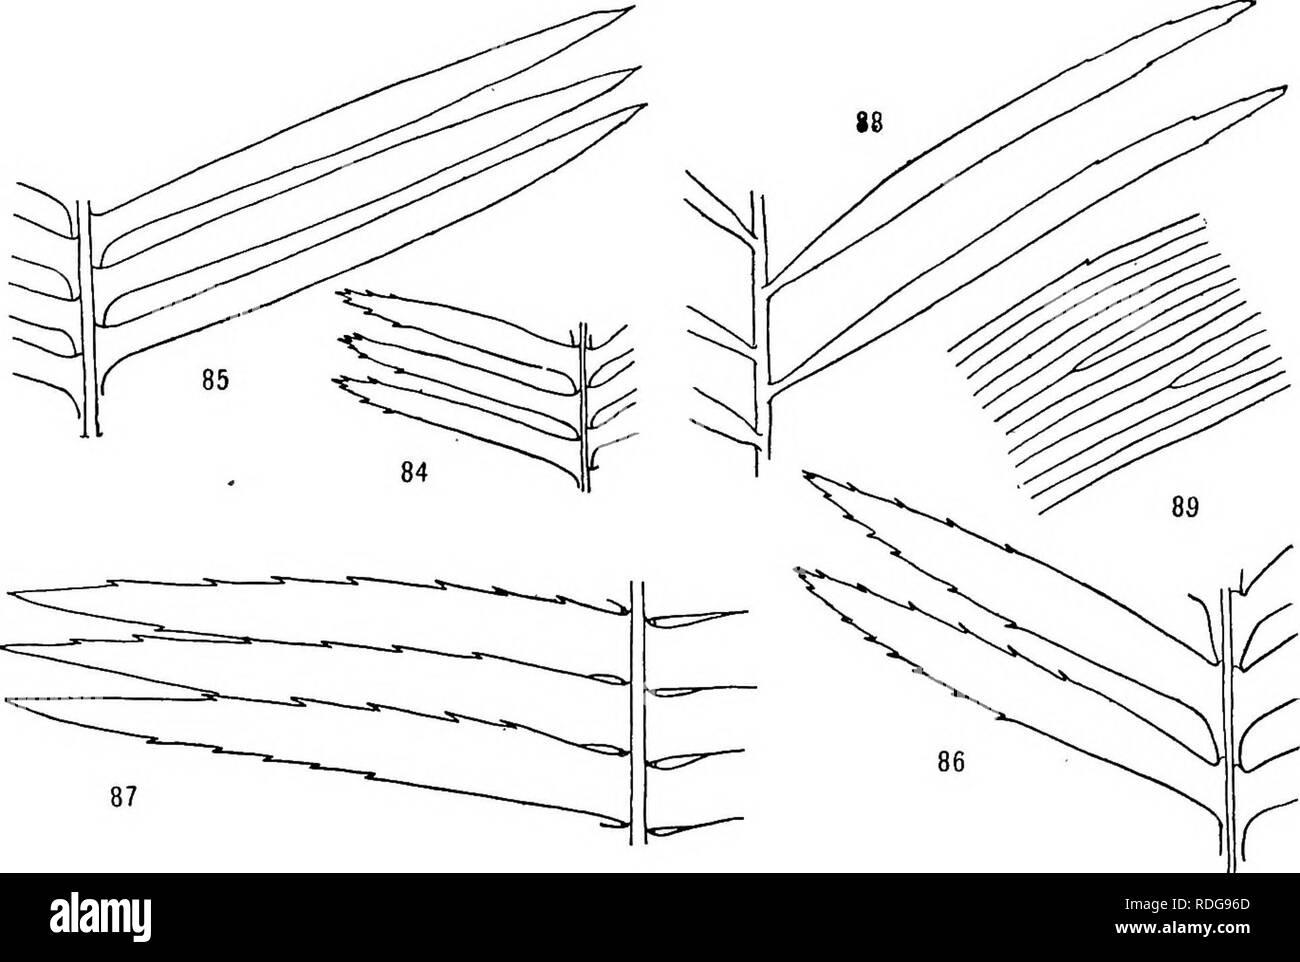 . Morphology of gymnosperms. Gymnosperms; Plant morphology. no MORPHOLOGY OF GYMNOSPERMS leaflets of the seedling are conspicuously spinulose, like the adult leaflets of D. spinulosum, but in older plants the margins are per- fectly smooth, the spinulose condition of the seedling of D. edule being a juvenile character indicating an ancestry with spinulose leaves (figs. 84-87). The venation is various; for example, the leaflets of Cycas have only a midrib without any branches; those of. Figs. 84-89.—Pinnules of cycads: fig. 84, part of leaf of seedling of Dioon edule; fig. 85, part of adult lea Stock Photo